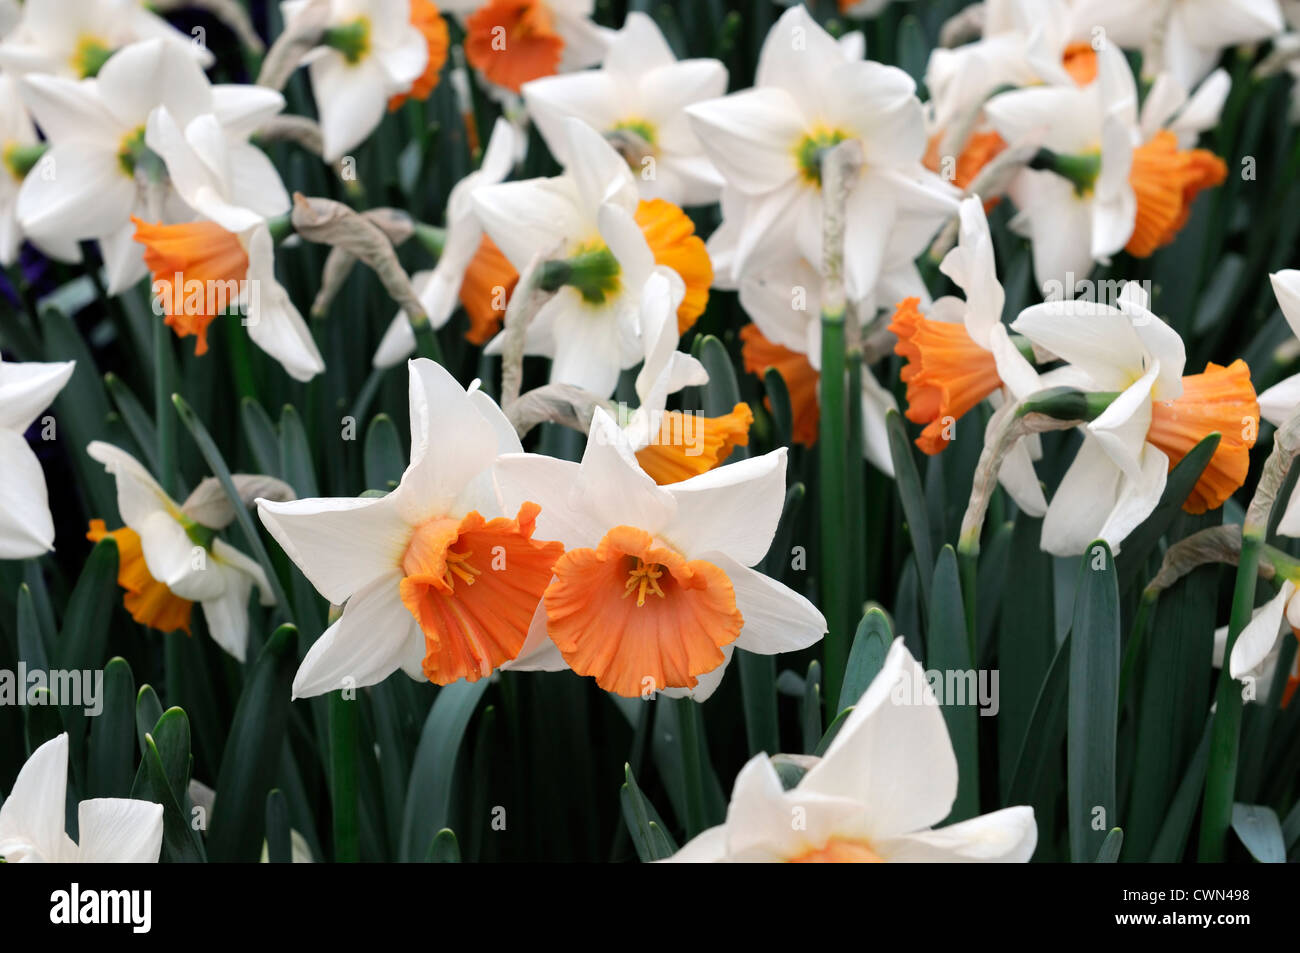 narcissus chromacolor white coral pink large cupped daffodil flowers narcissi daffodils bulbs spring flowering bloom blossom Stock Photo